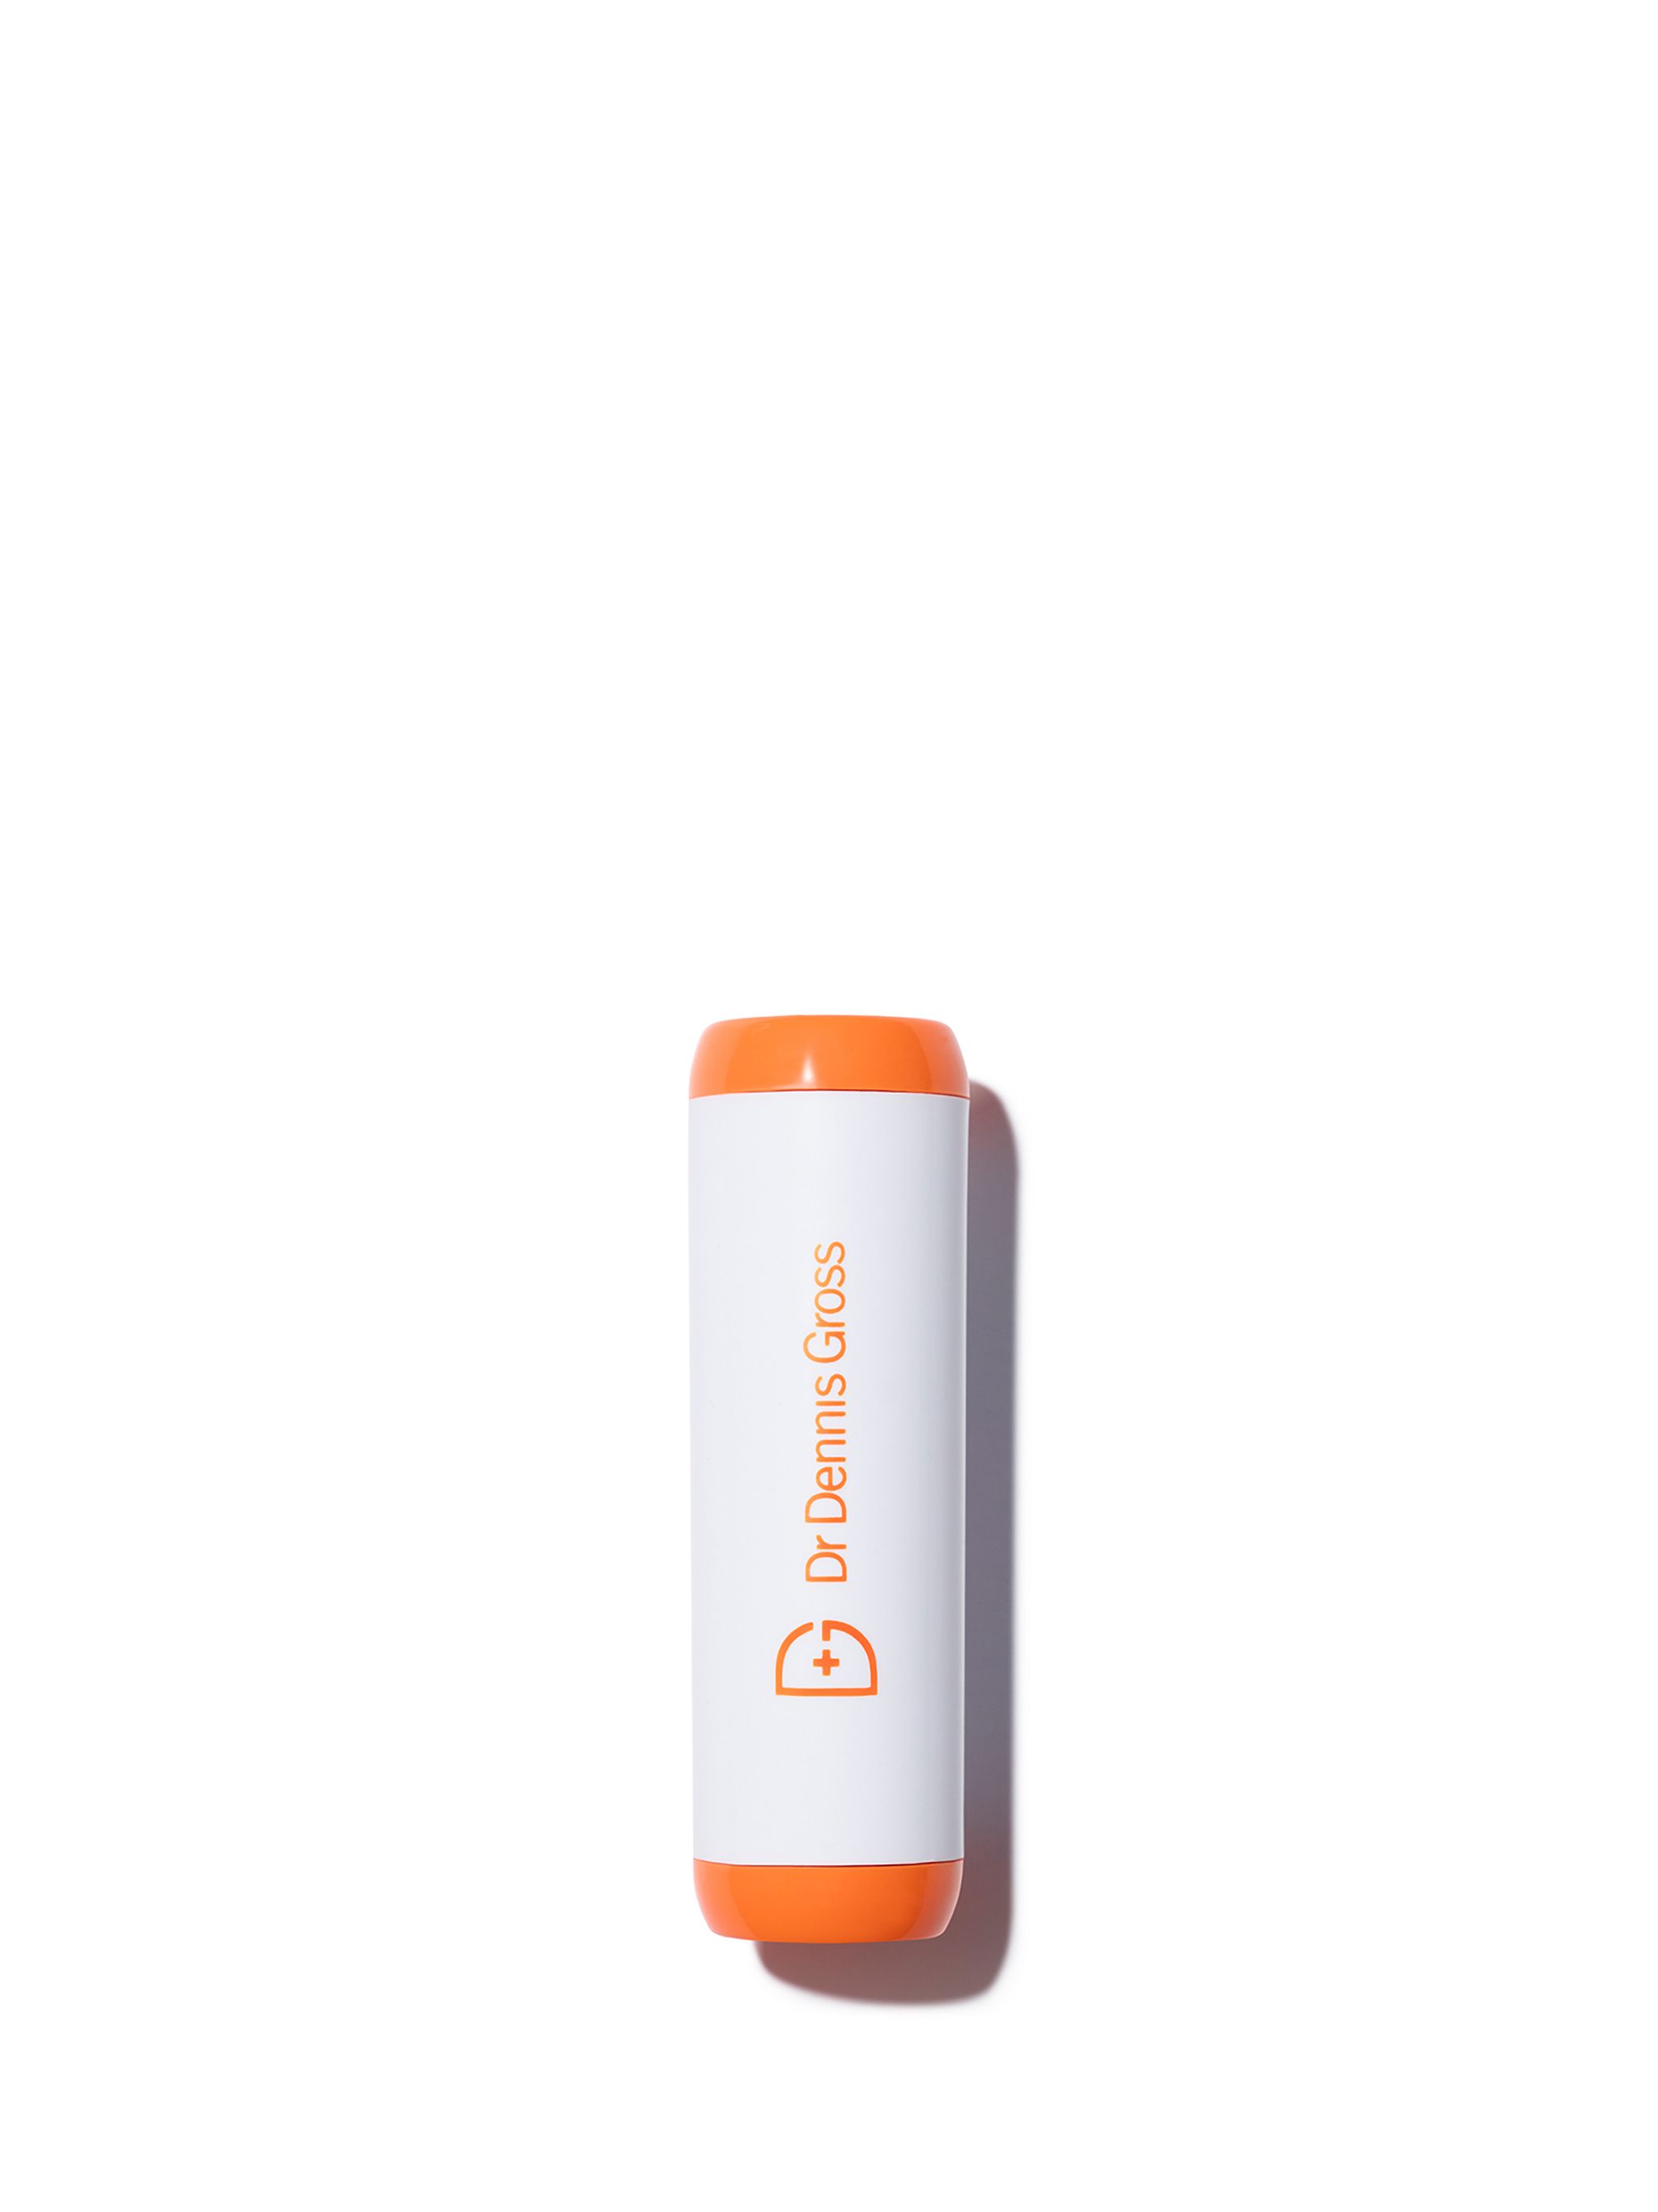 Dr. Dennis Gross DRX SpotLite Acne Treatment Device in orangd and white.